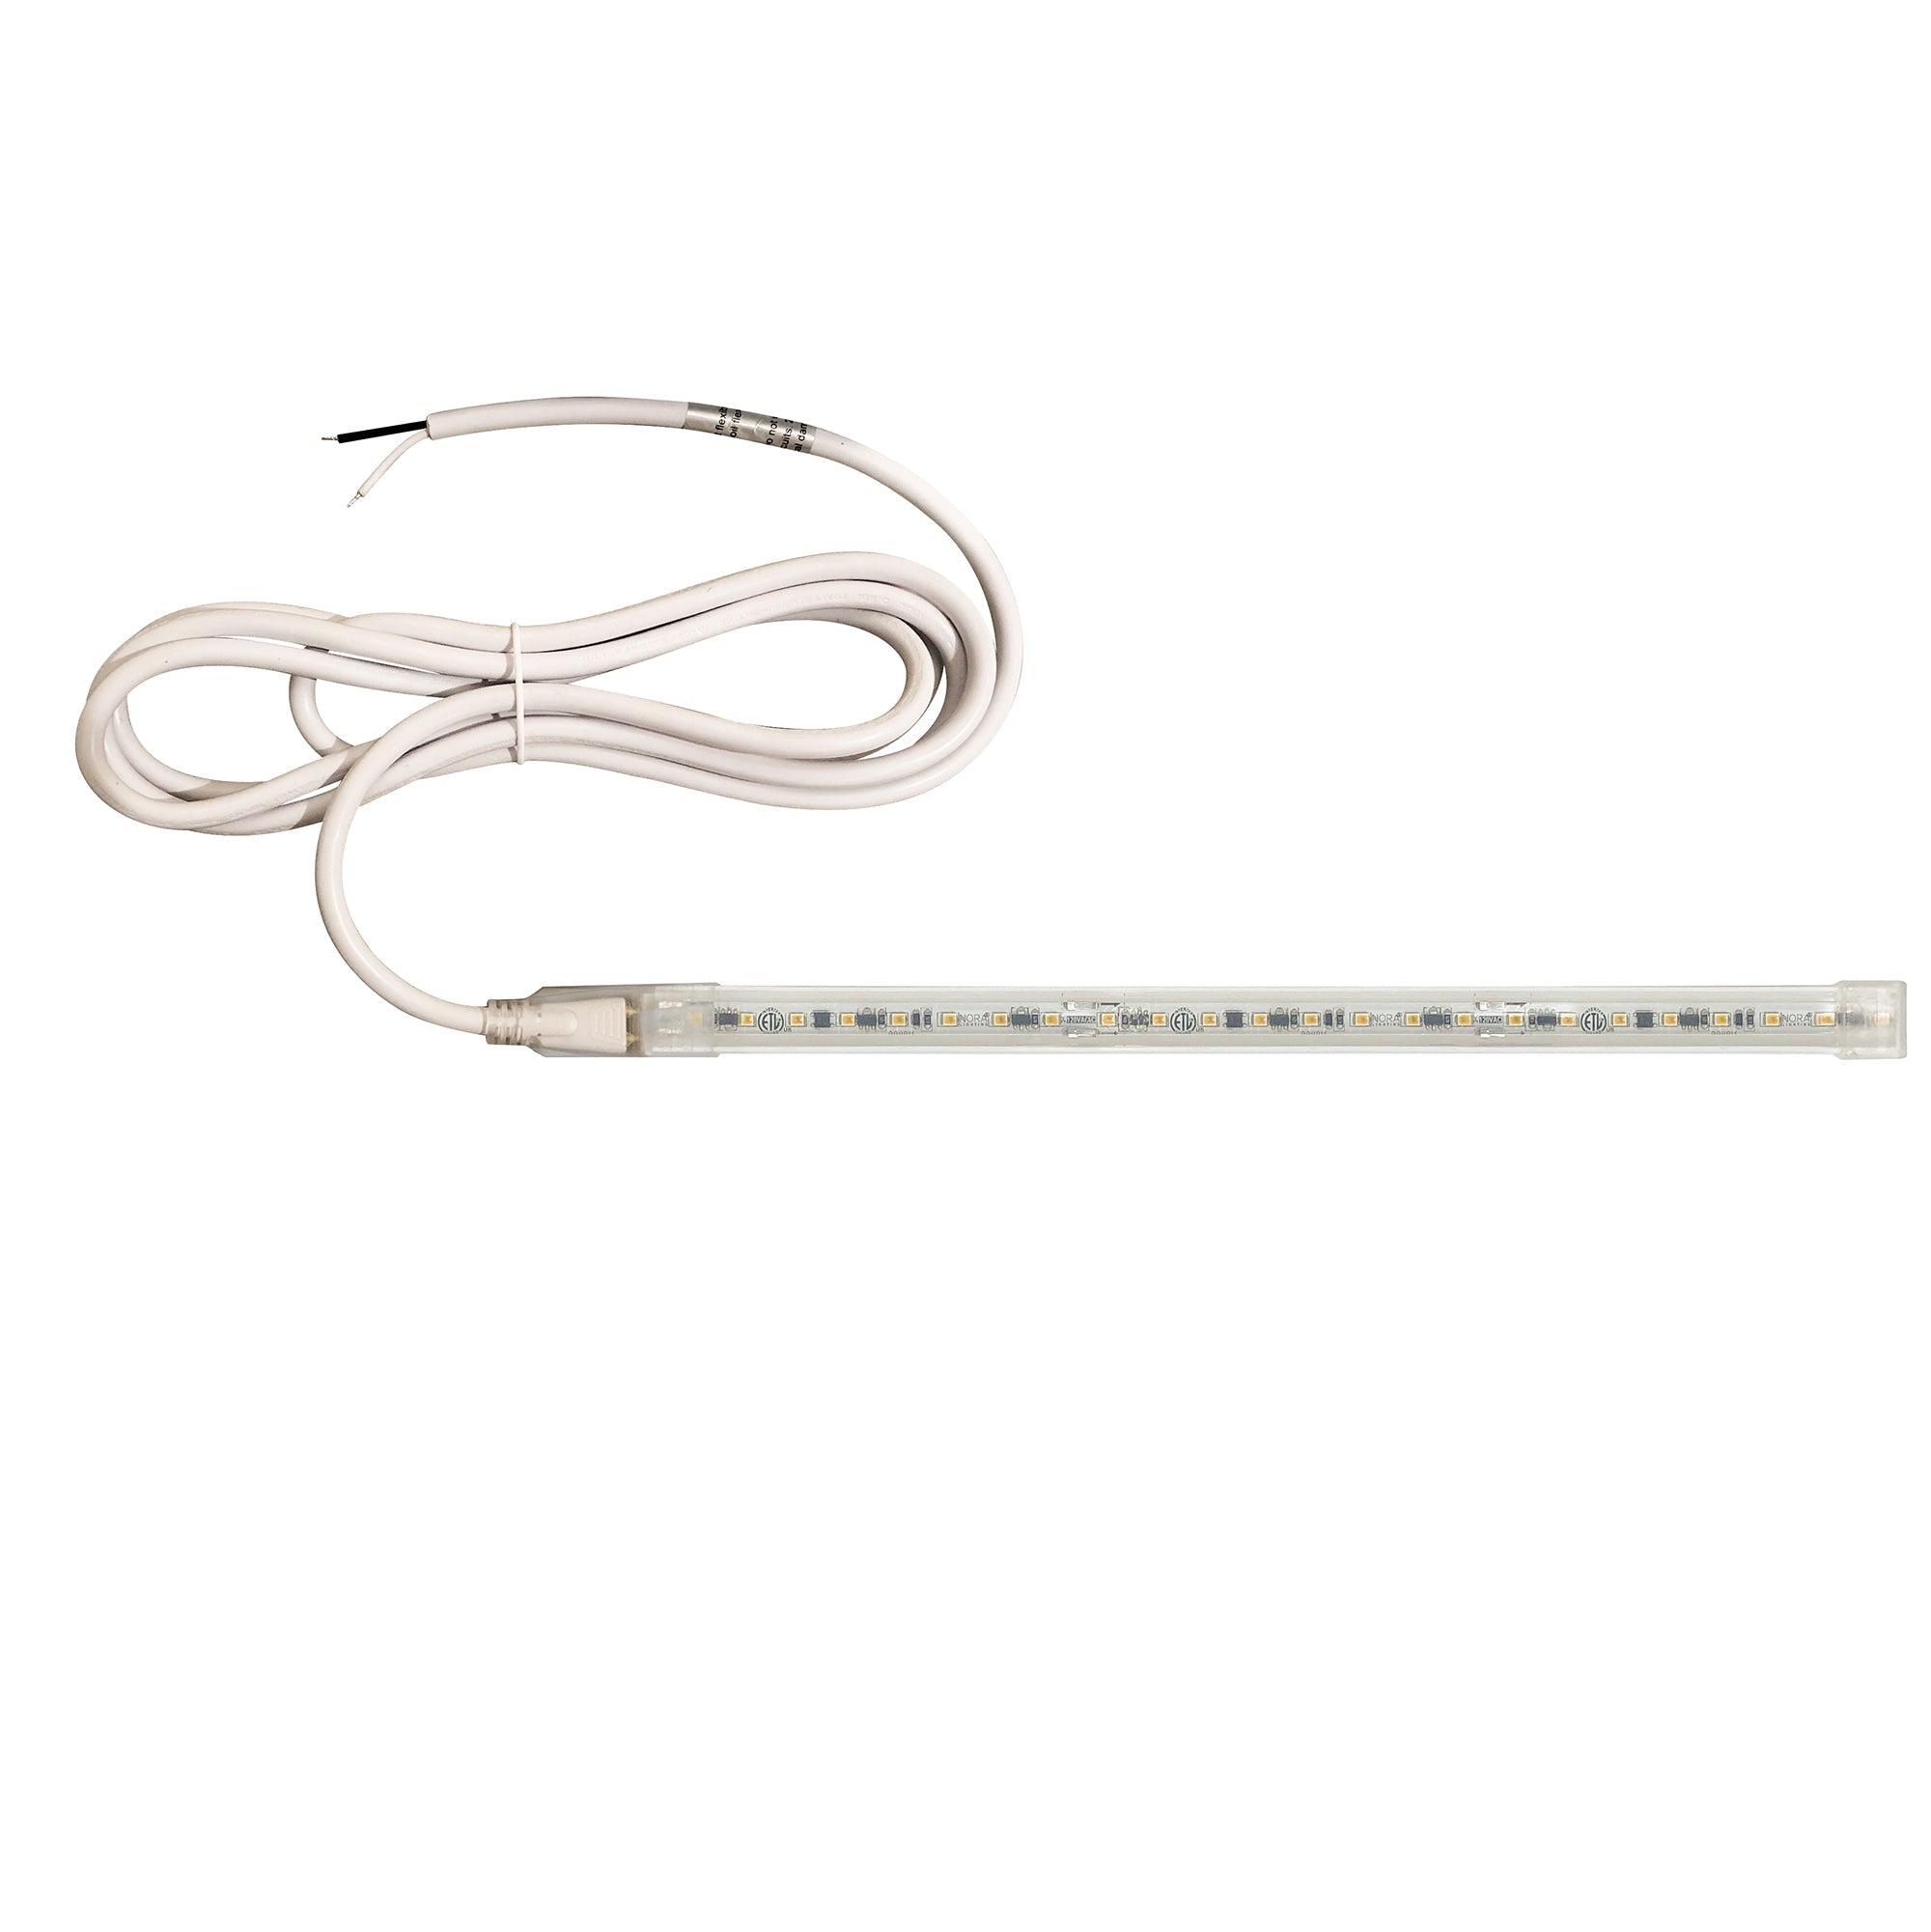 Nora Lighting NUTP13-W101-12-927/HW - Accent / Undercabinet - Custom Cut 101-ft 120V Continuous LED Tape Light, 330lm / 3.6W per foot, 2700K, w/ Mounting Clips and 8' Hardwired Power Cord